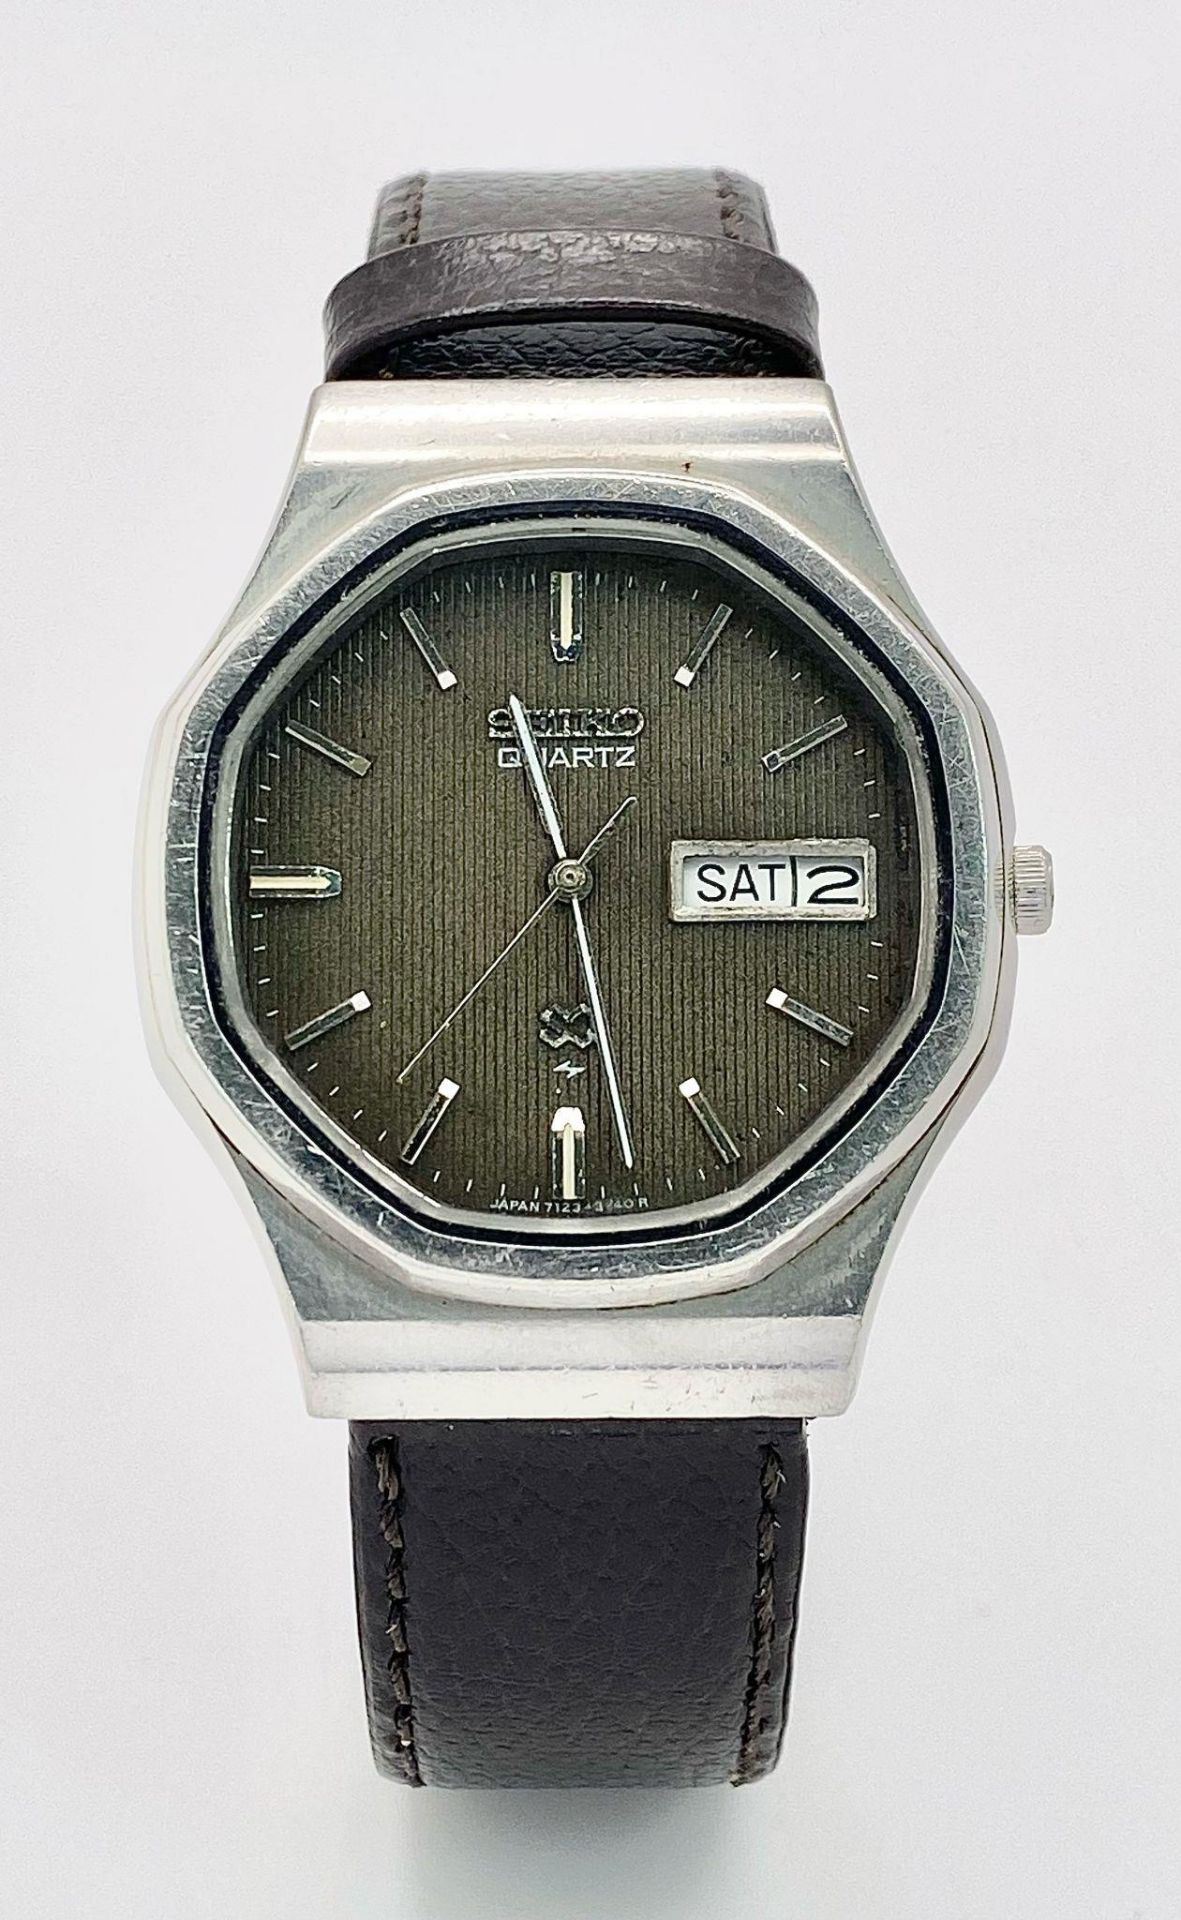 A Vintage Seiko Quartz Watch. Black leather strap. Octagonal case - 36mm. Grey dial with day/date - Image 2 of 7